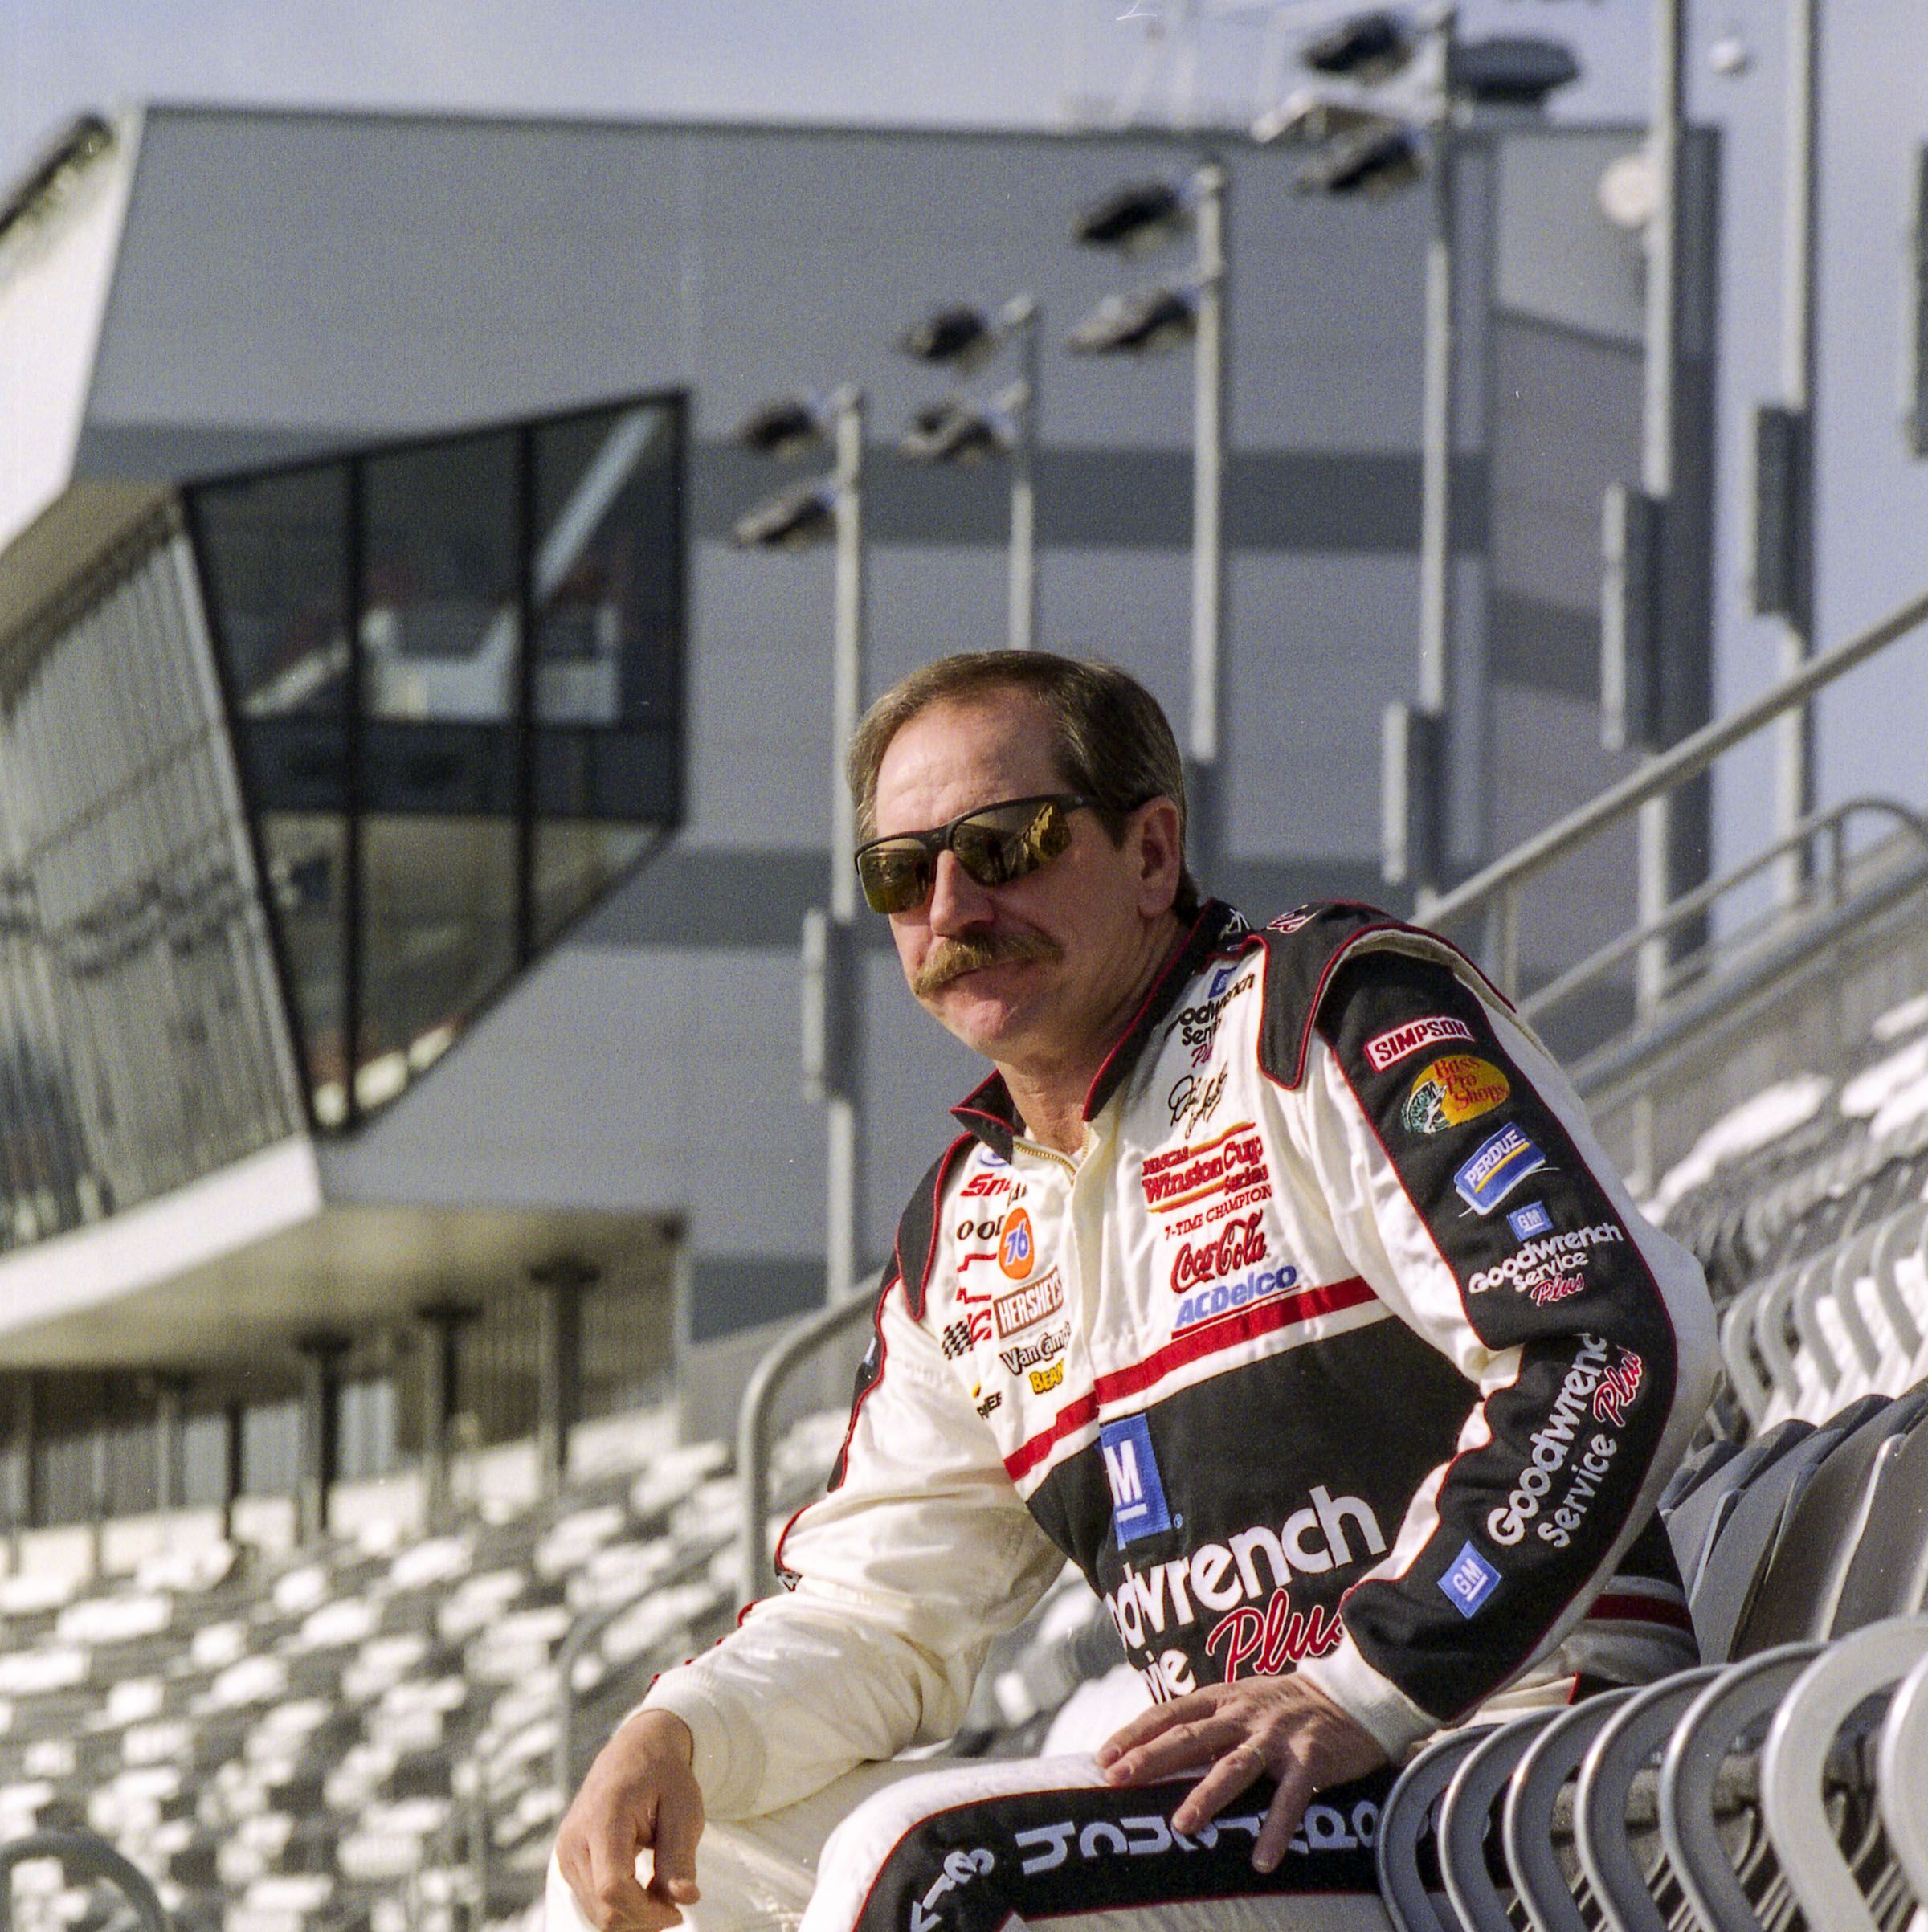 dale earnhardt cause of death